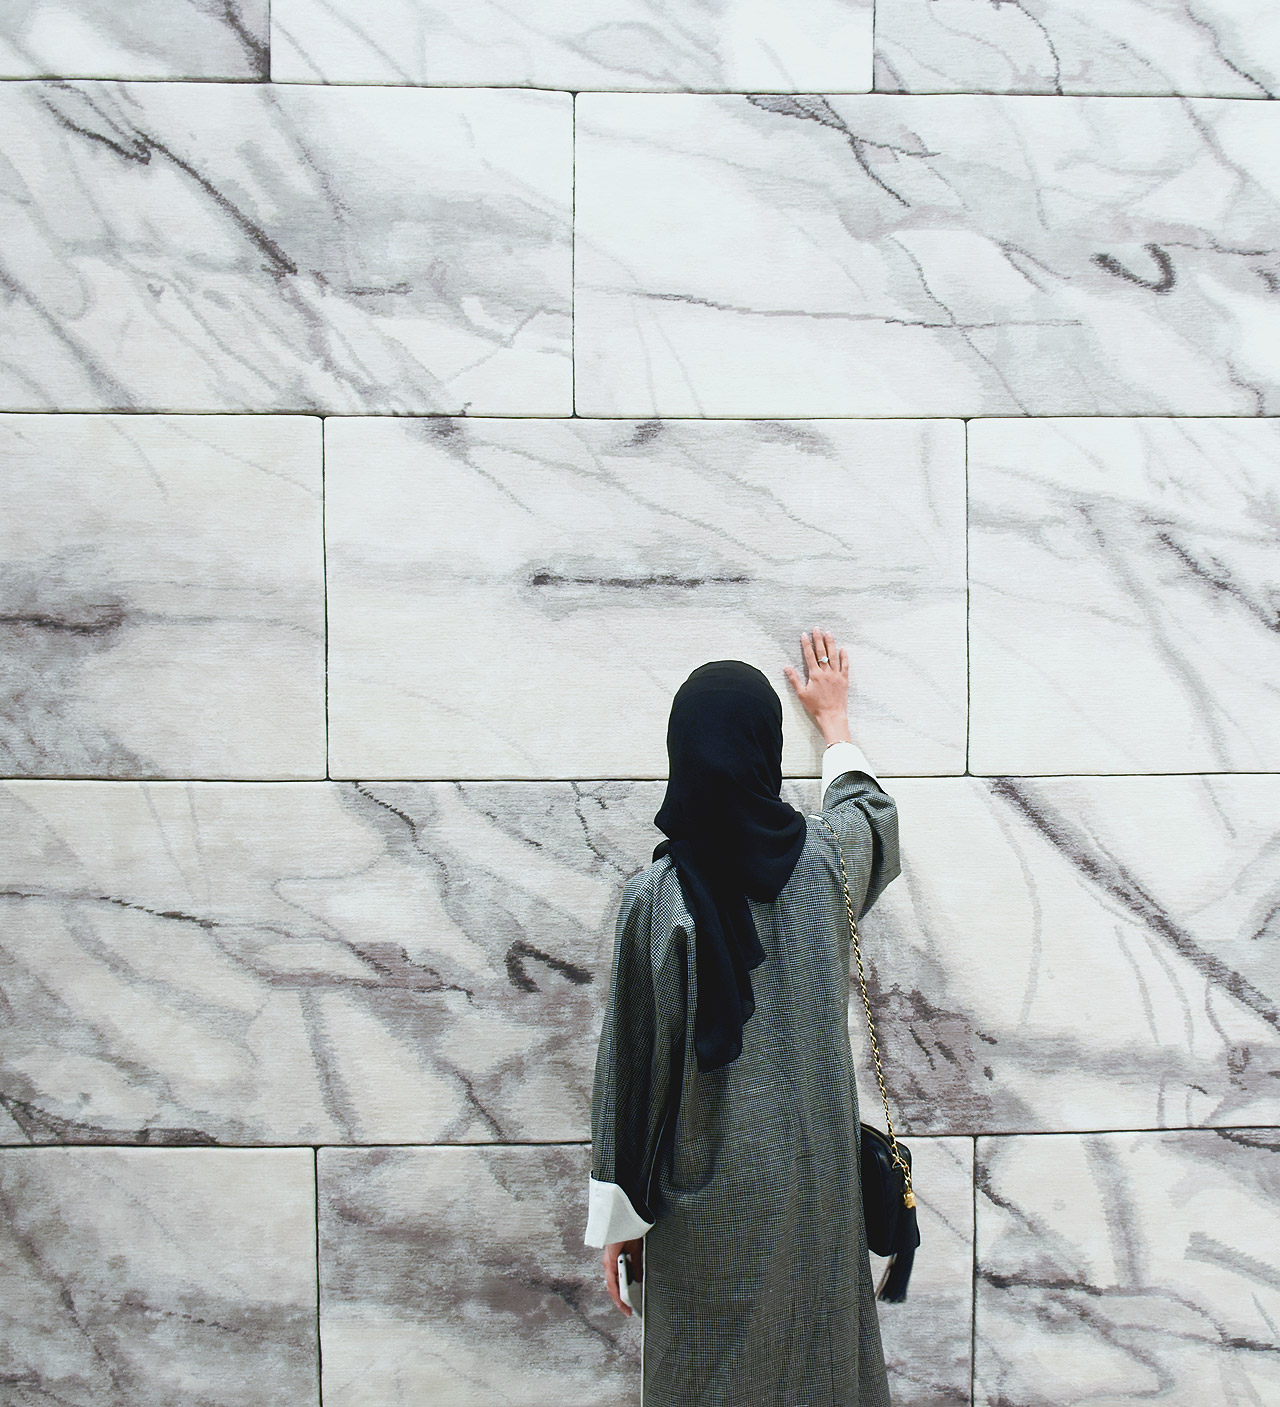 Dubai-based designer Aljoud Lootah interacts with the softest marble tiles in the world from the Floor to Heaven series by Michaela Schleypen at Samovar Carpets during Downtown Design Dubai 2016.